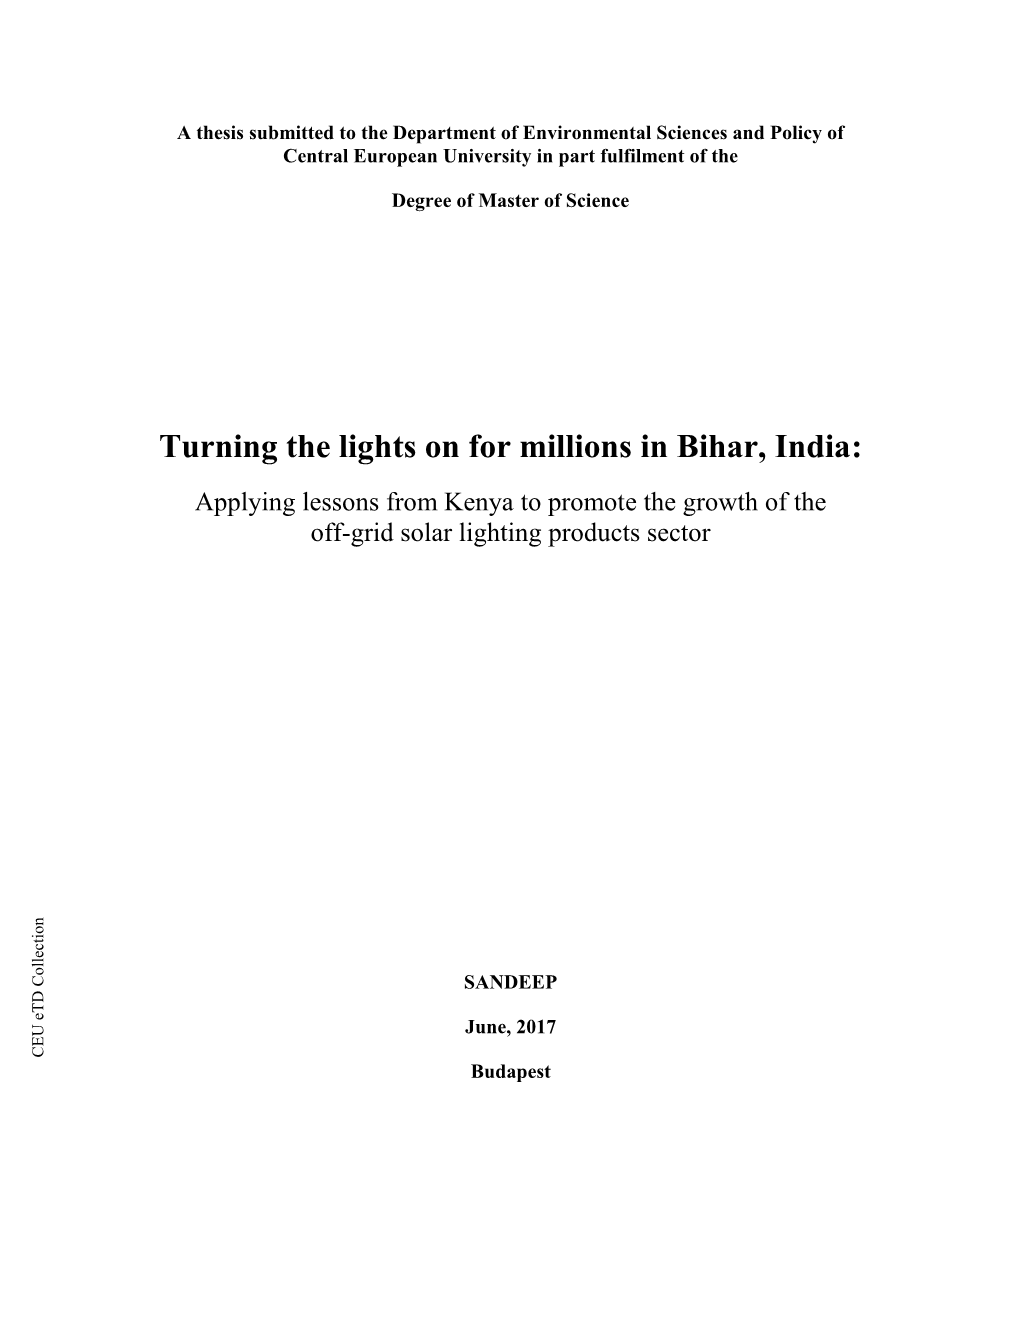 Turning the Lights on for Millions in Bihar, India